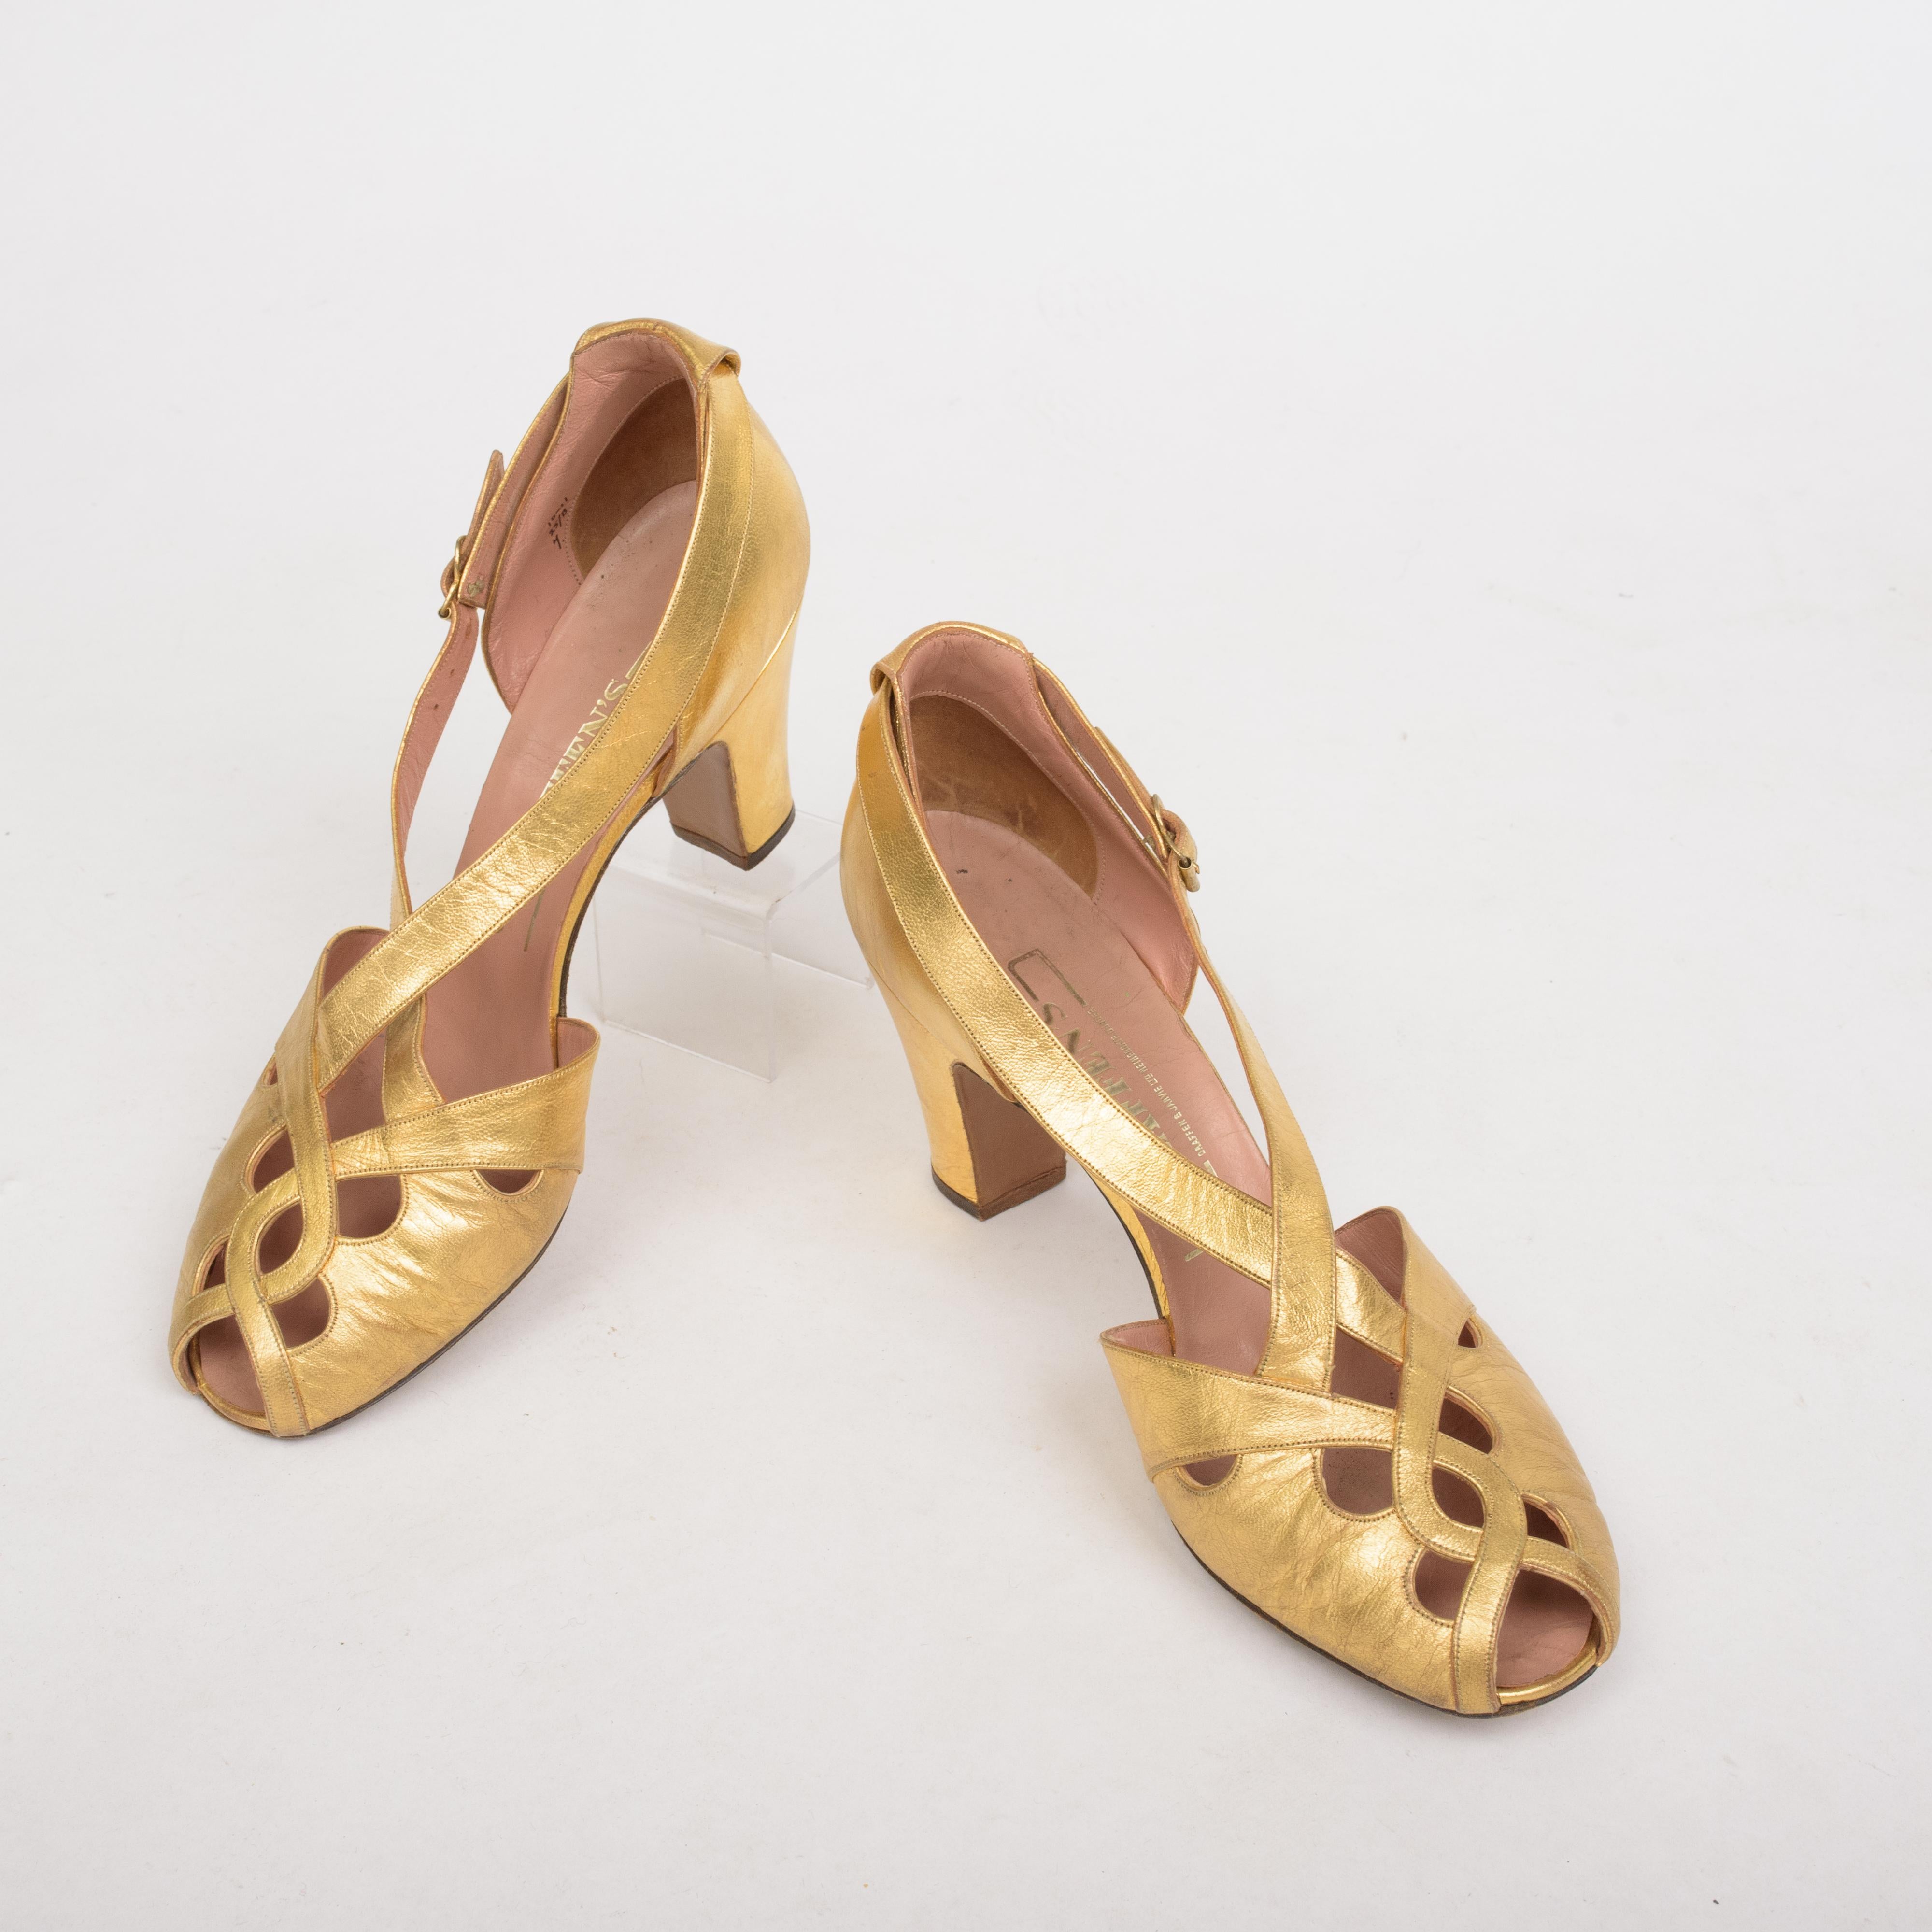 Pairs of ballroom shoes - Salomés in golden leather Circa 1930/1940 5